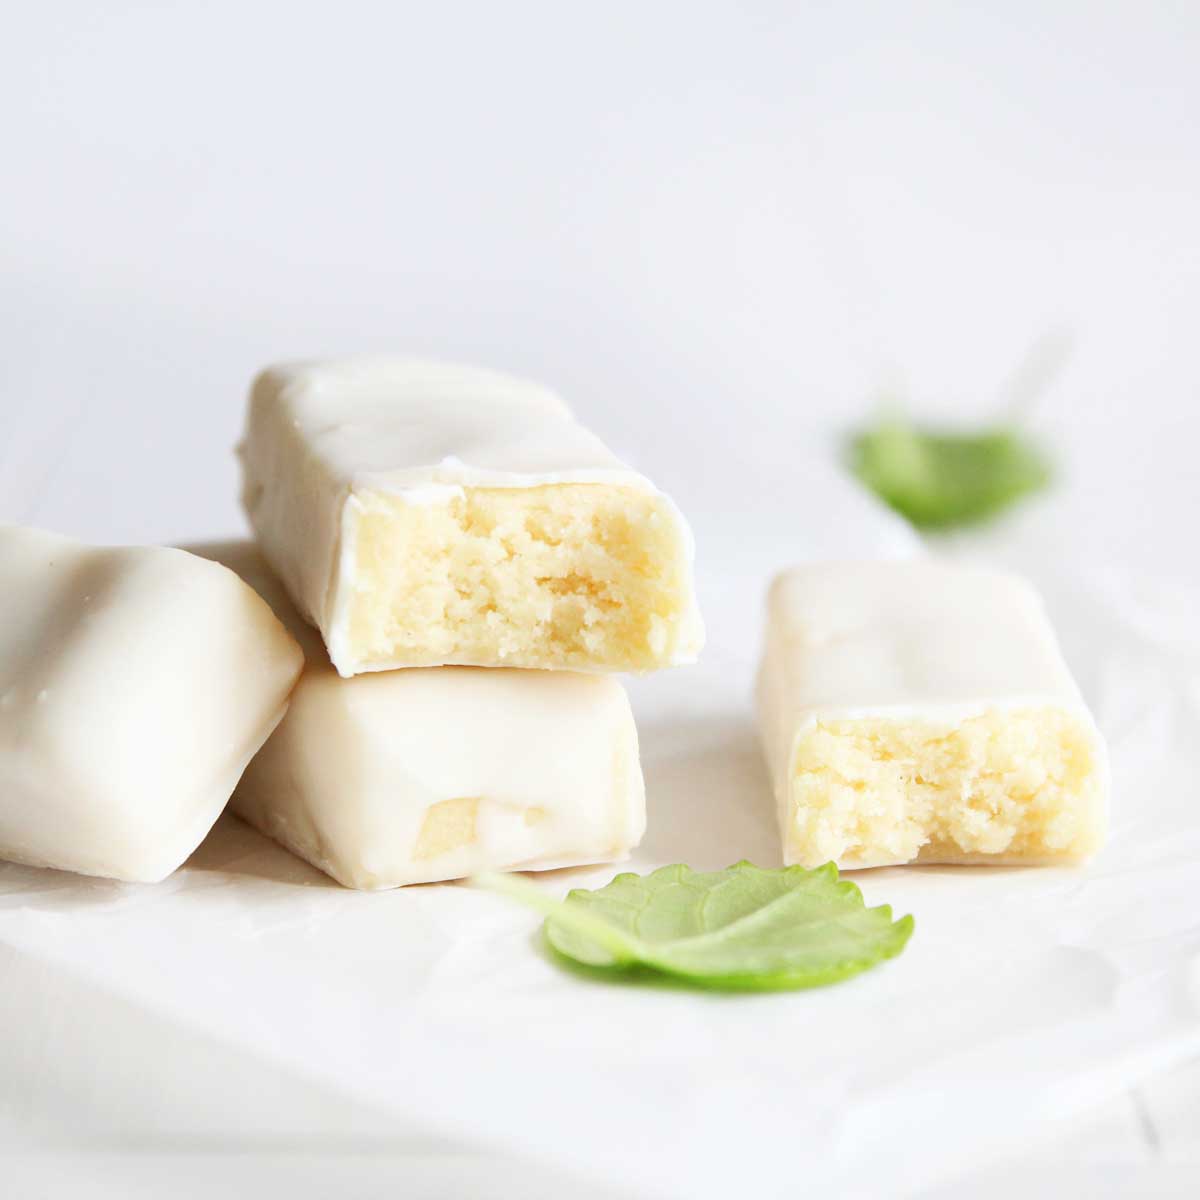 Healthy Homemade Lemon Protein Bars made with Collagen Peptides - Nutella Protein Bars